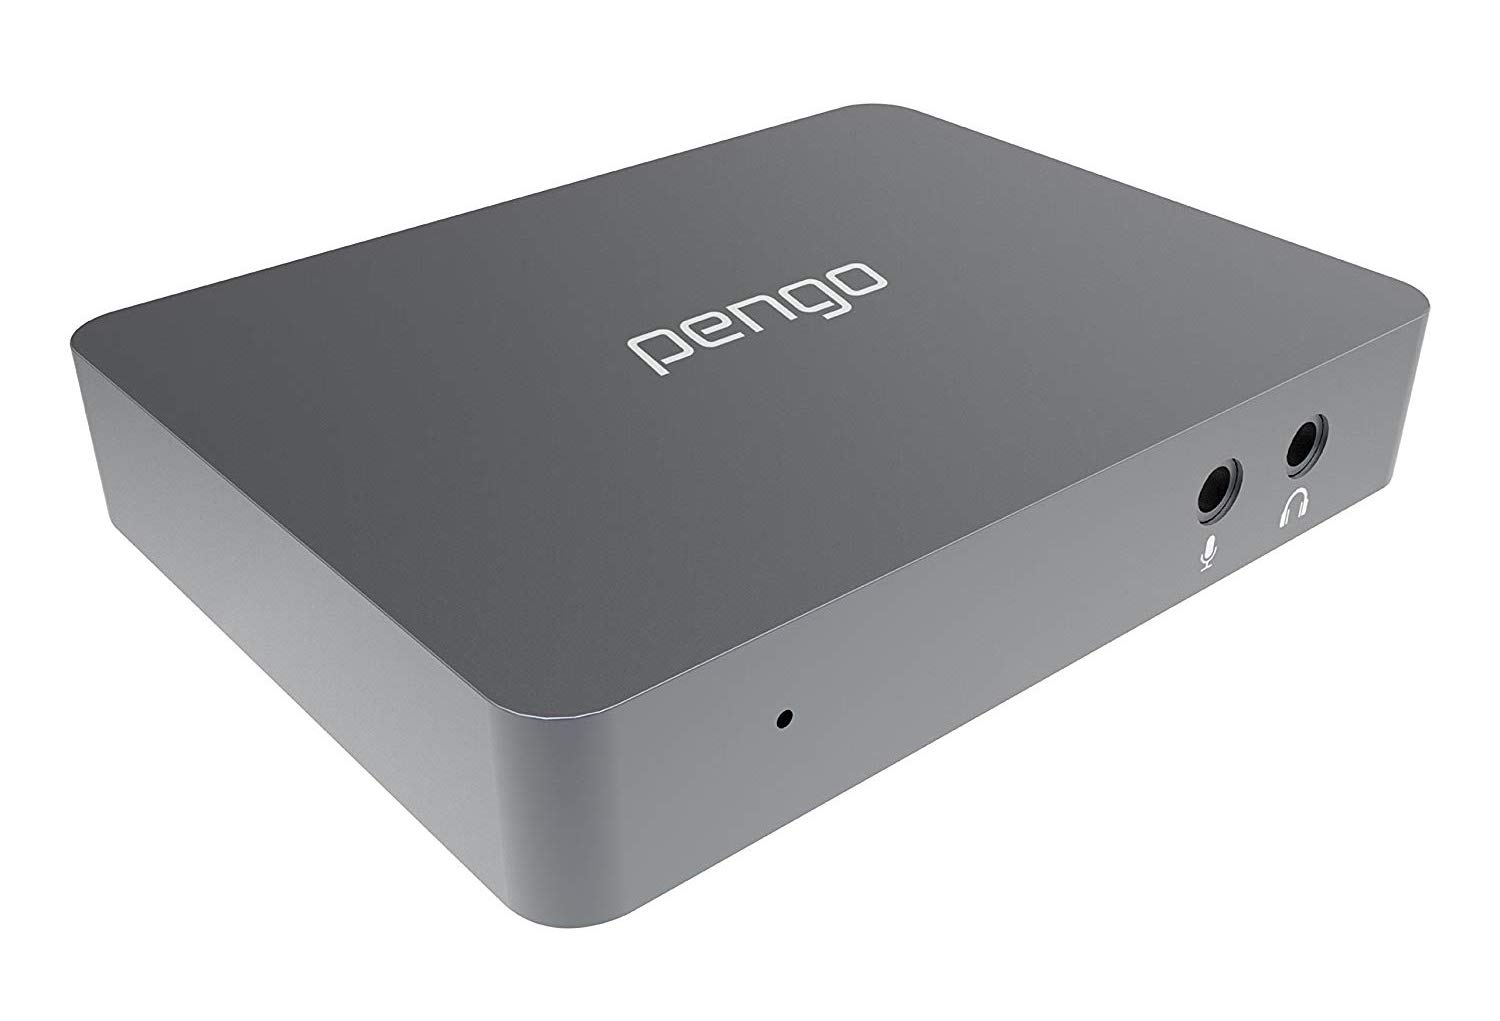 Review: Pengo External Game Capture Card — Affordable quality